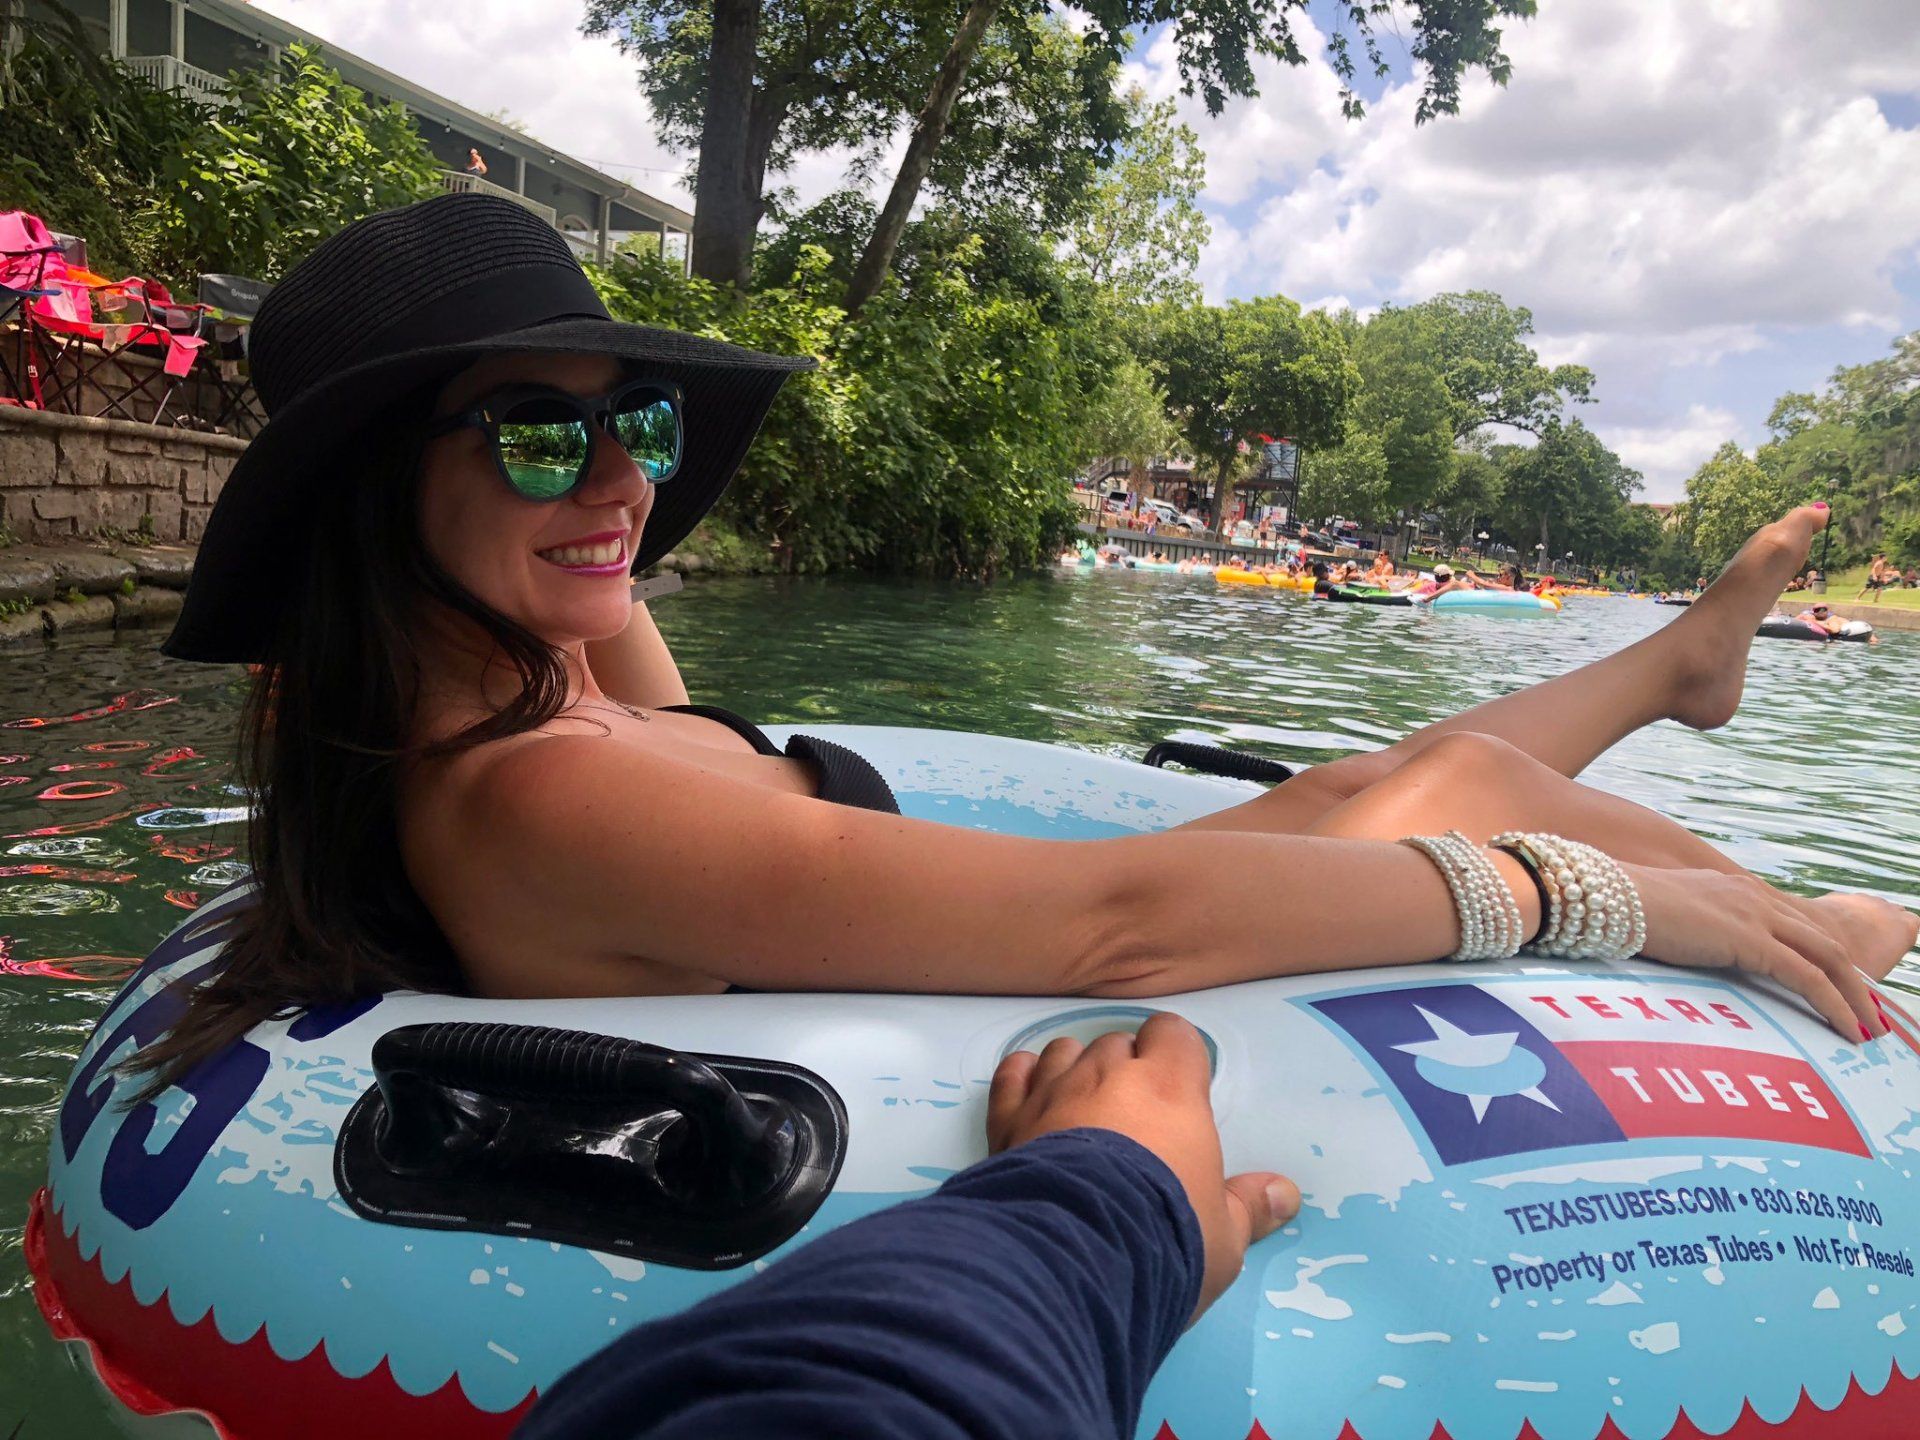 Floating, relaxing and drifting down the lazy Comal River at Texas Tubes in nearby New Braunfels, right in San Antonio's backyard!